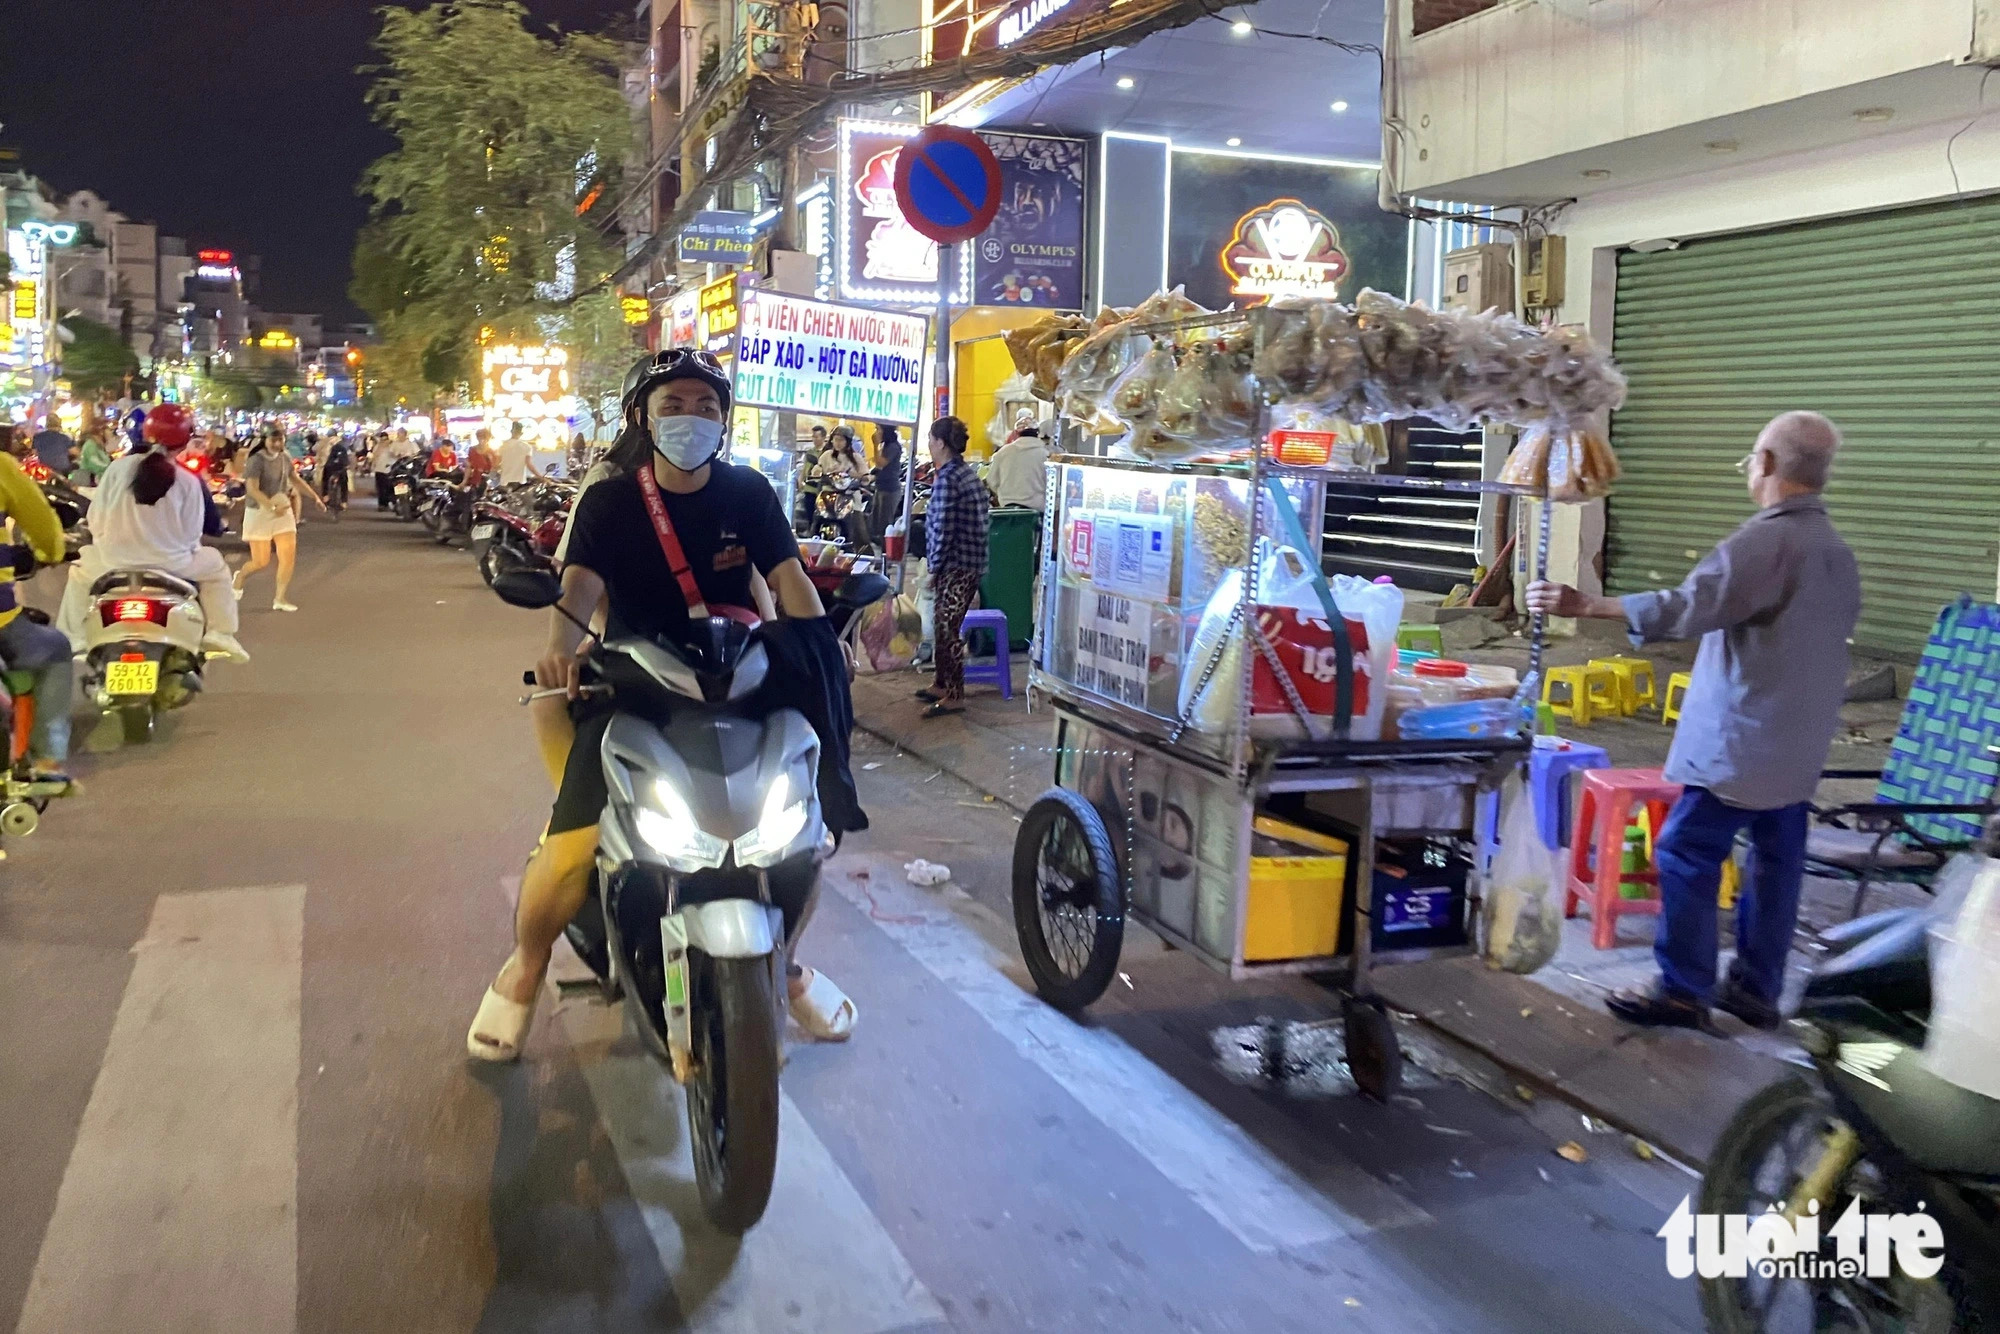 A motorcyclist is seen riding in the wrong direction to buy items from food cart operators that encroach on Nguyen Gia Tri Street, located in Ward 25, Binh Thanh District, Ho Chi Minh City. Photo: Tien Quoc / Tuoi Tre